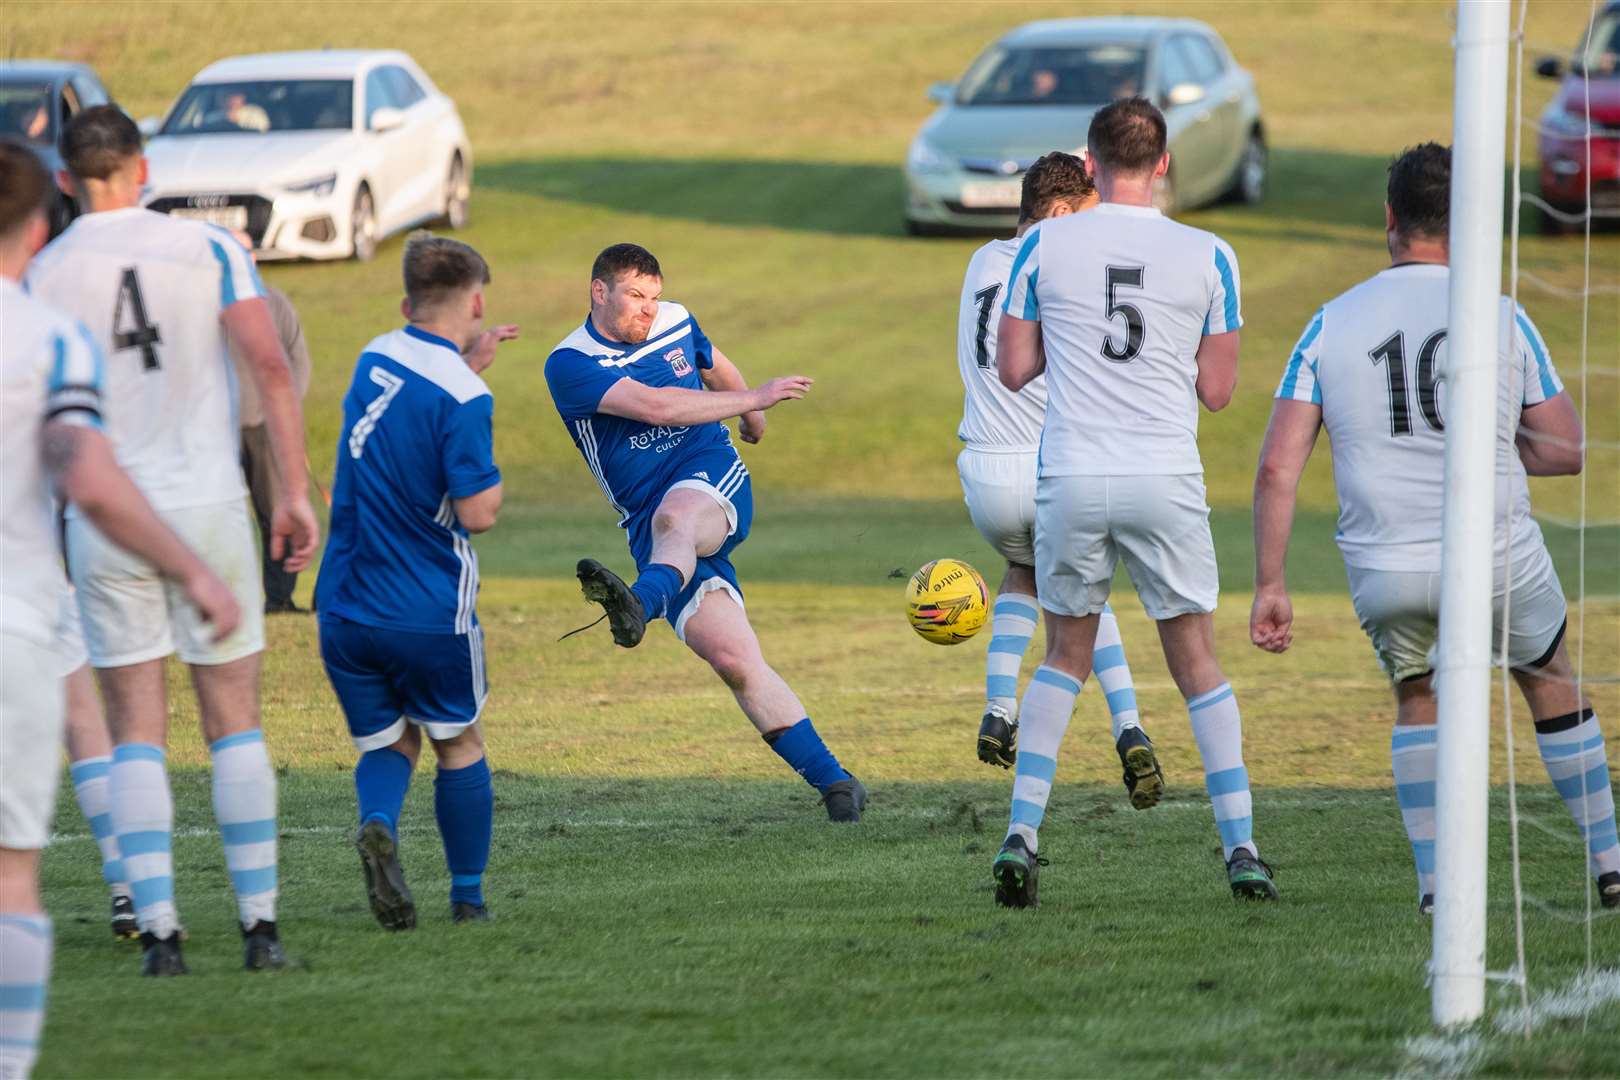 Cullen's Scott Mair unleashes a shot on goal as the home side look for an equaliser. Picture: Daniel Forsyth